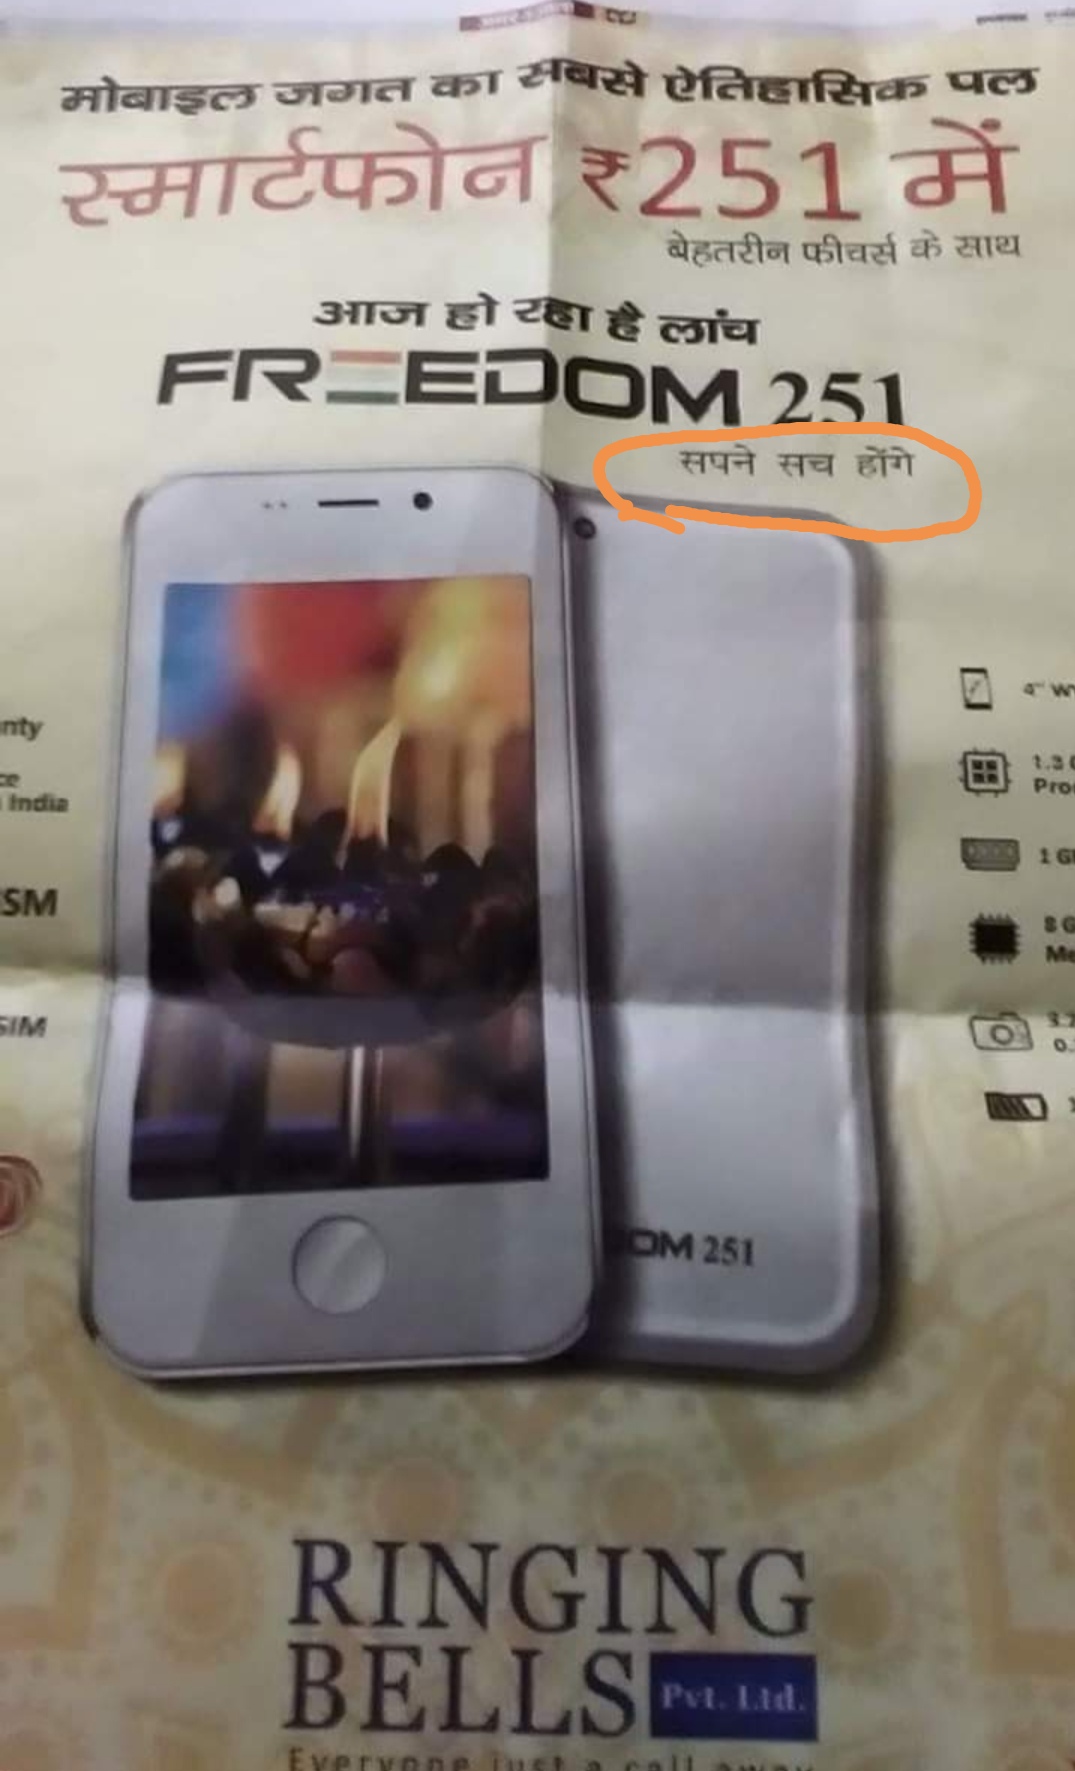 Freedom 251: Mobile industry raises concerns over device's unsustainable  cheap price tag - IBTimes India